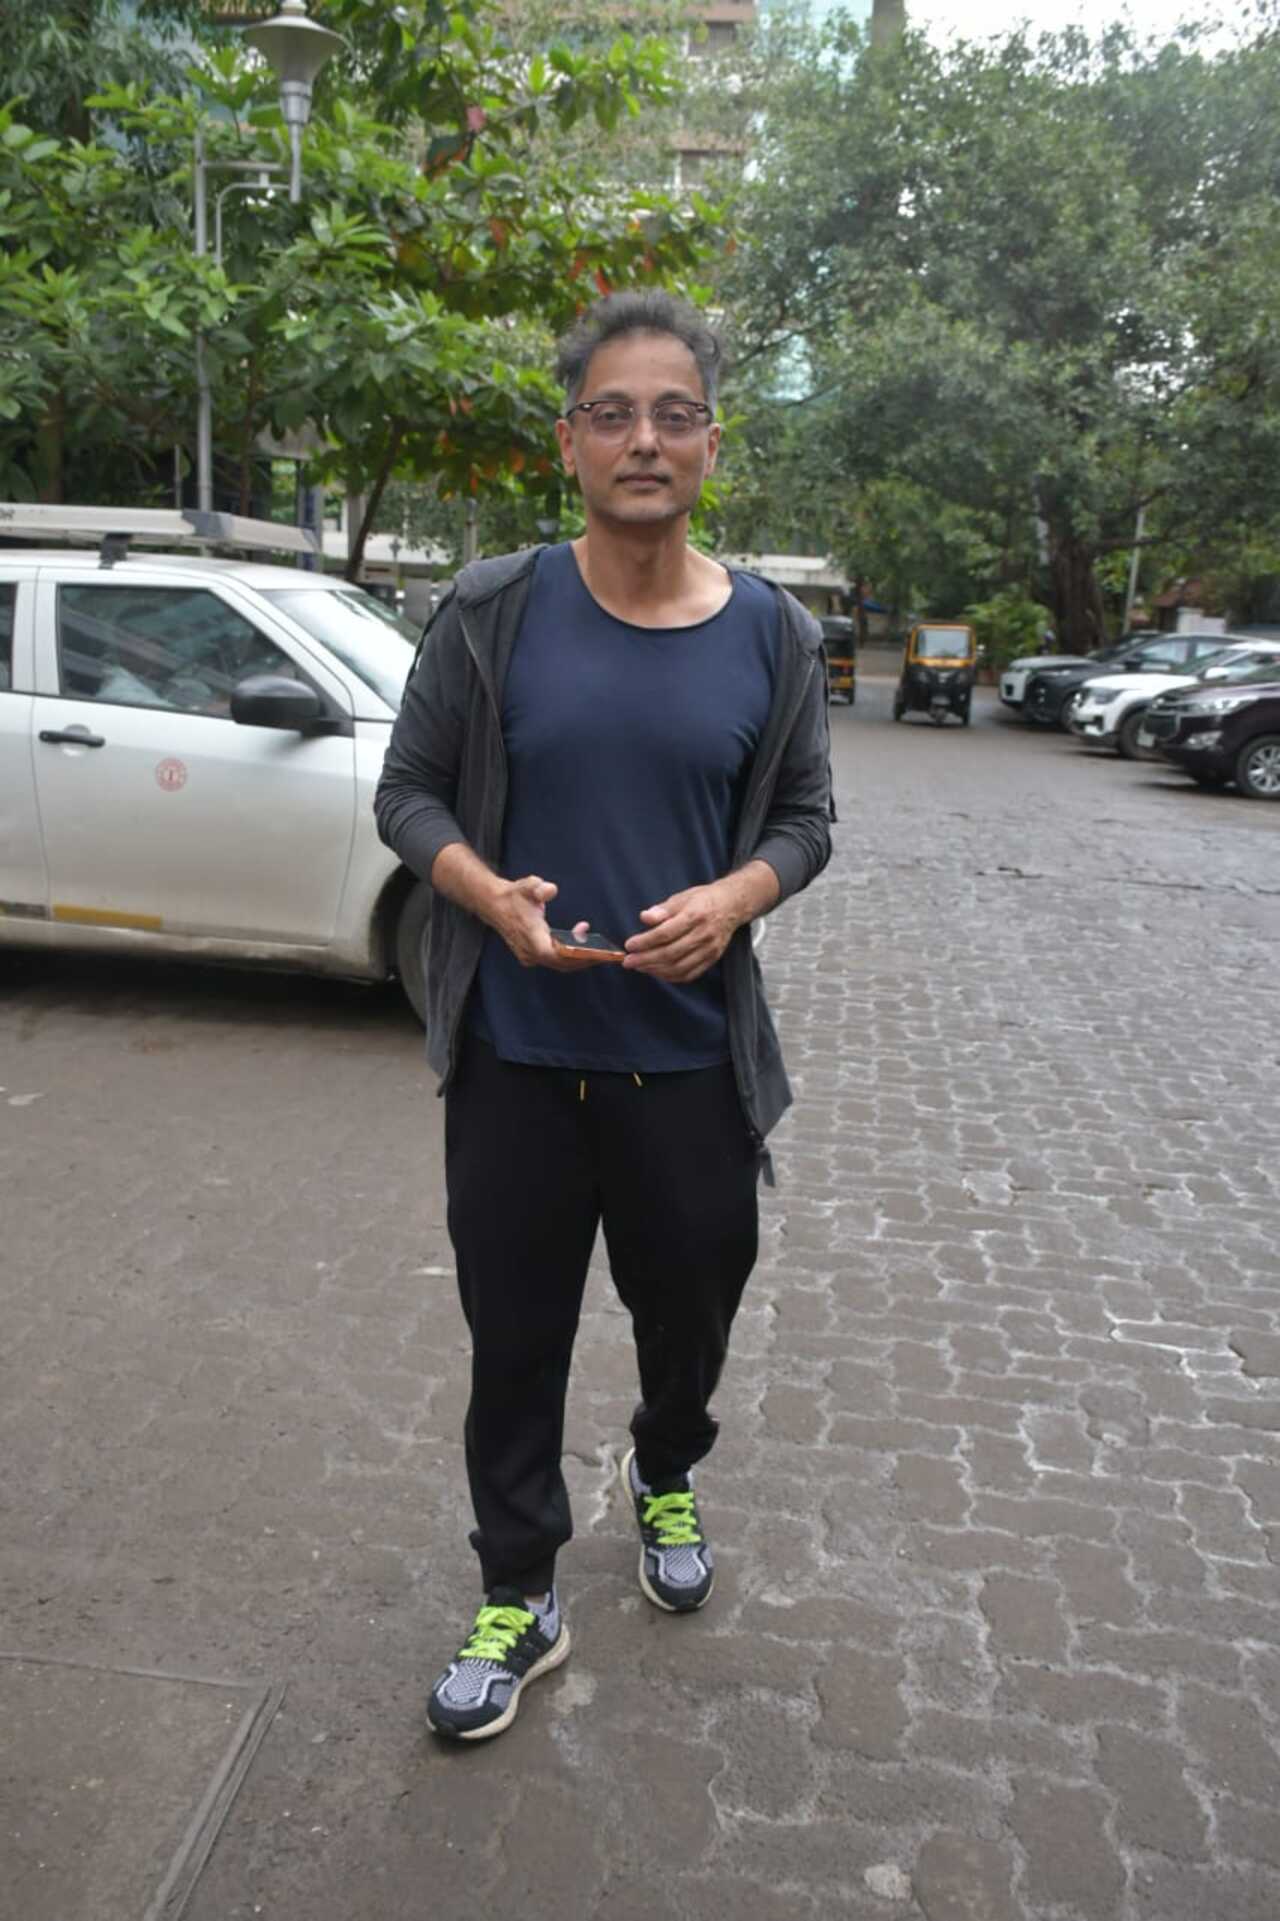 Sujoy Ghosh was clicked in the city